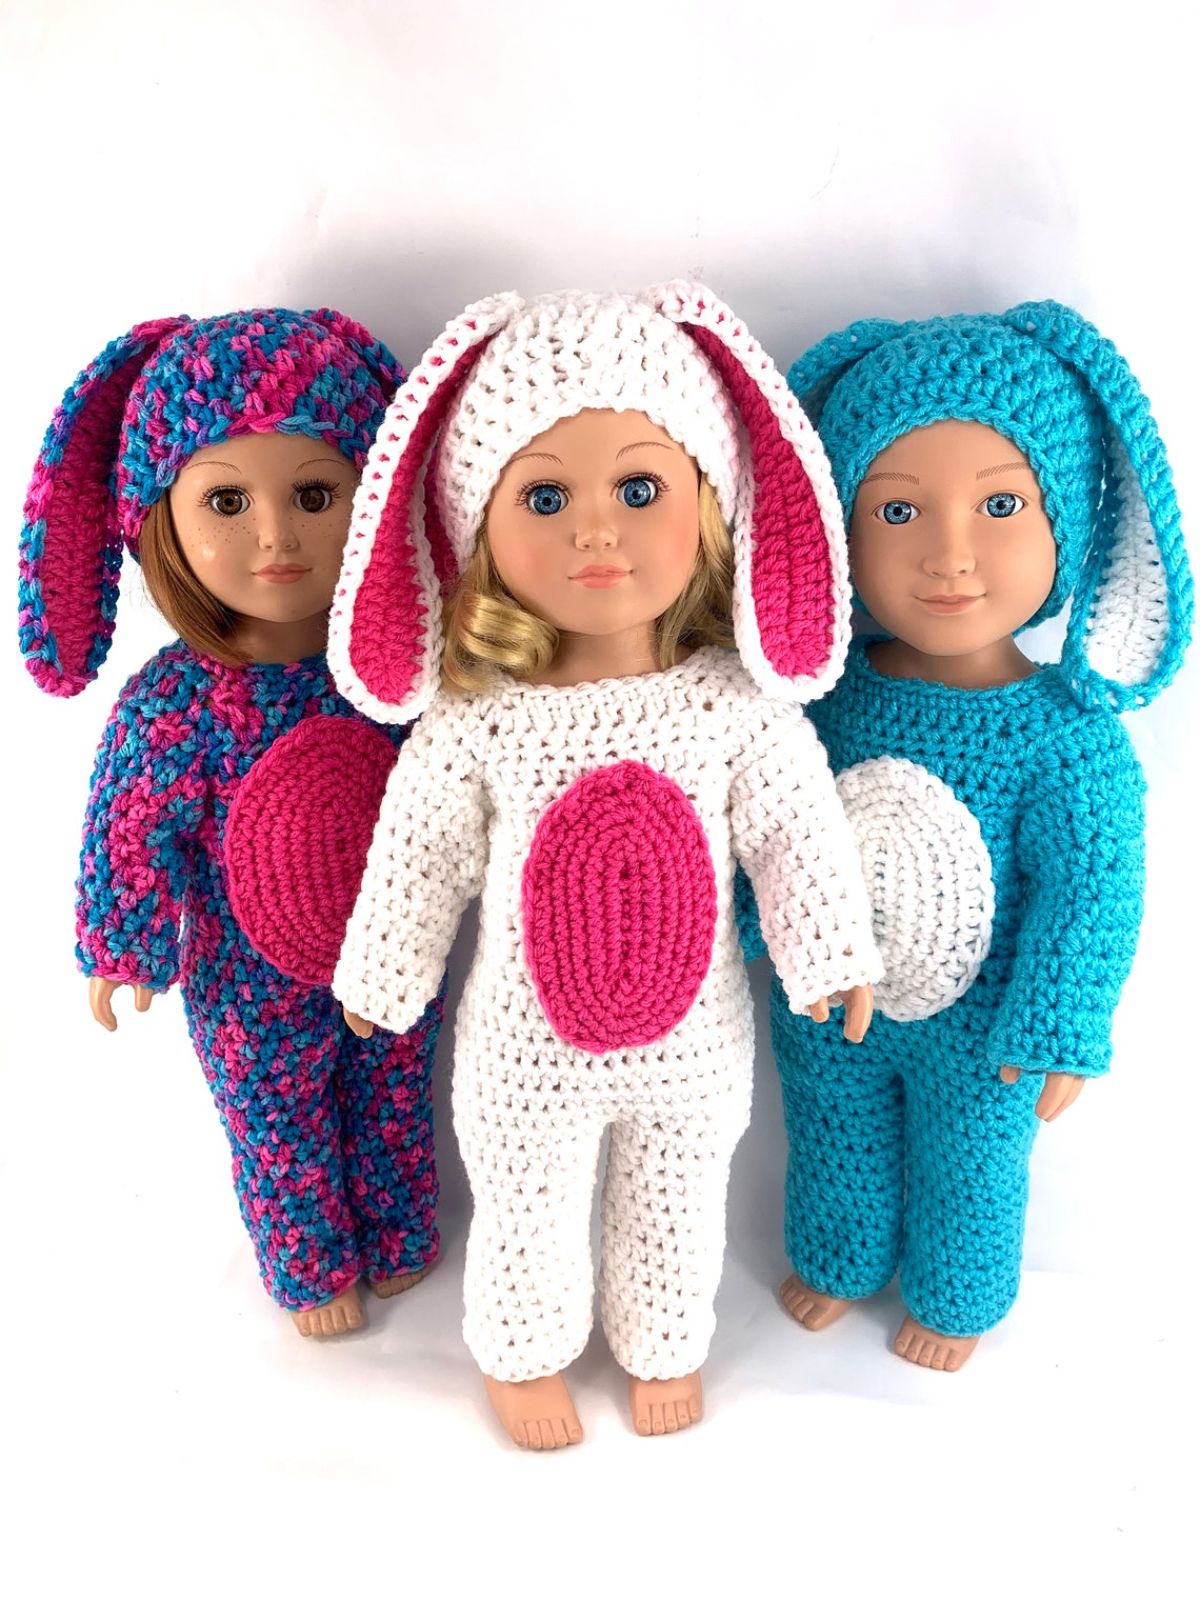 Three girl dolls wearing full length bunny outfits with matching hats with floppy bunny ears standing next to each other.